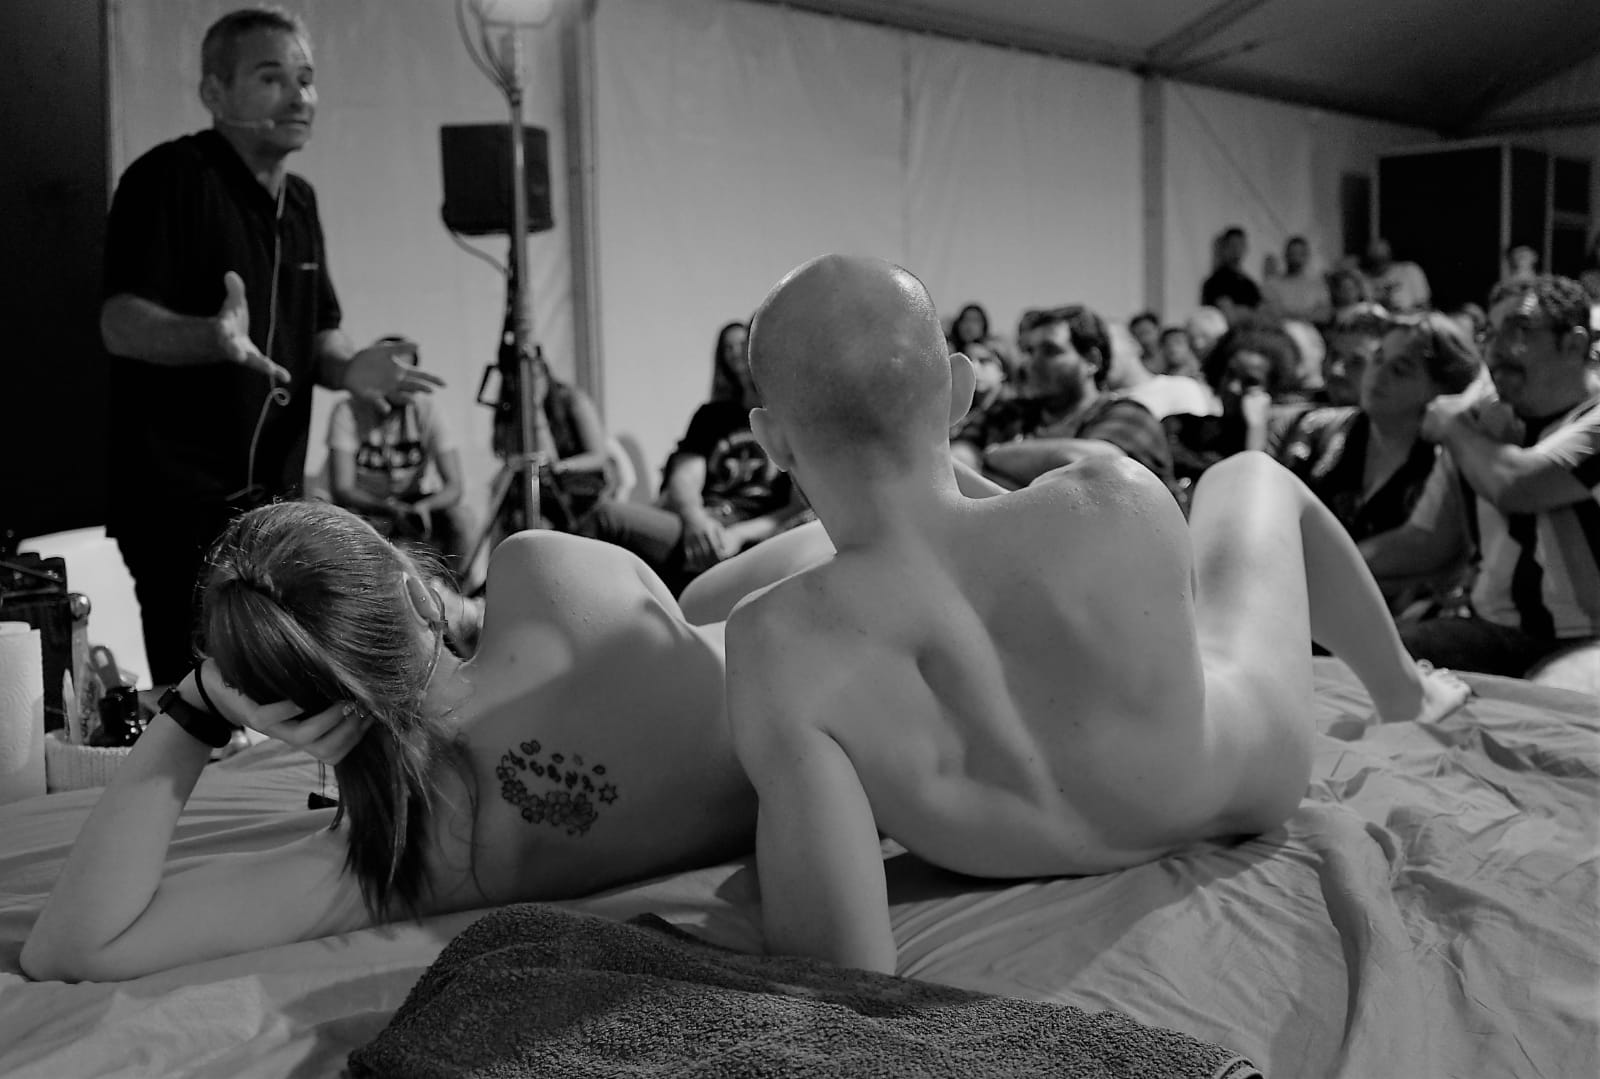 Sex Coaching with sex on stage in the Barcelona Erotic Festival 2019